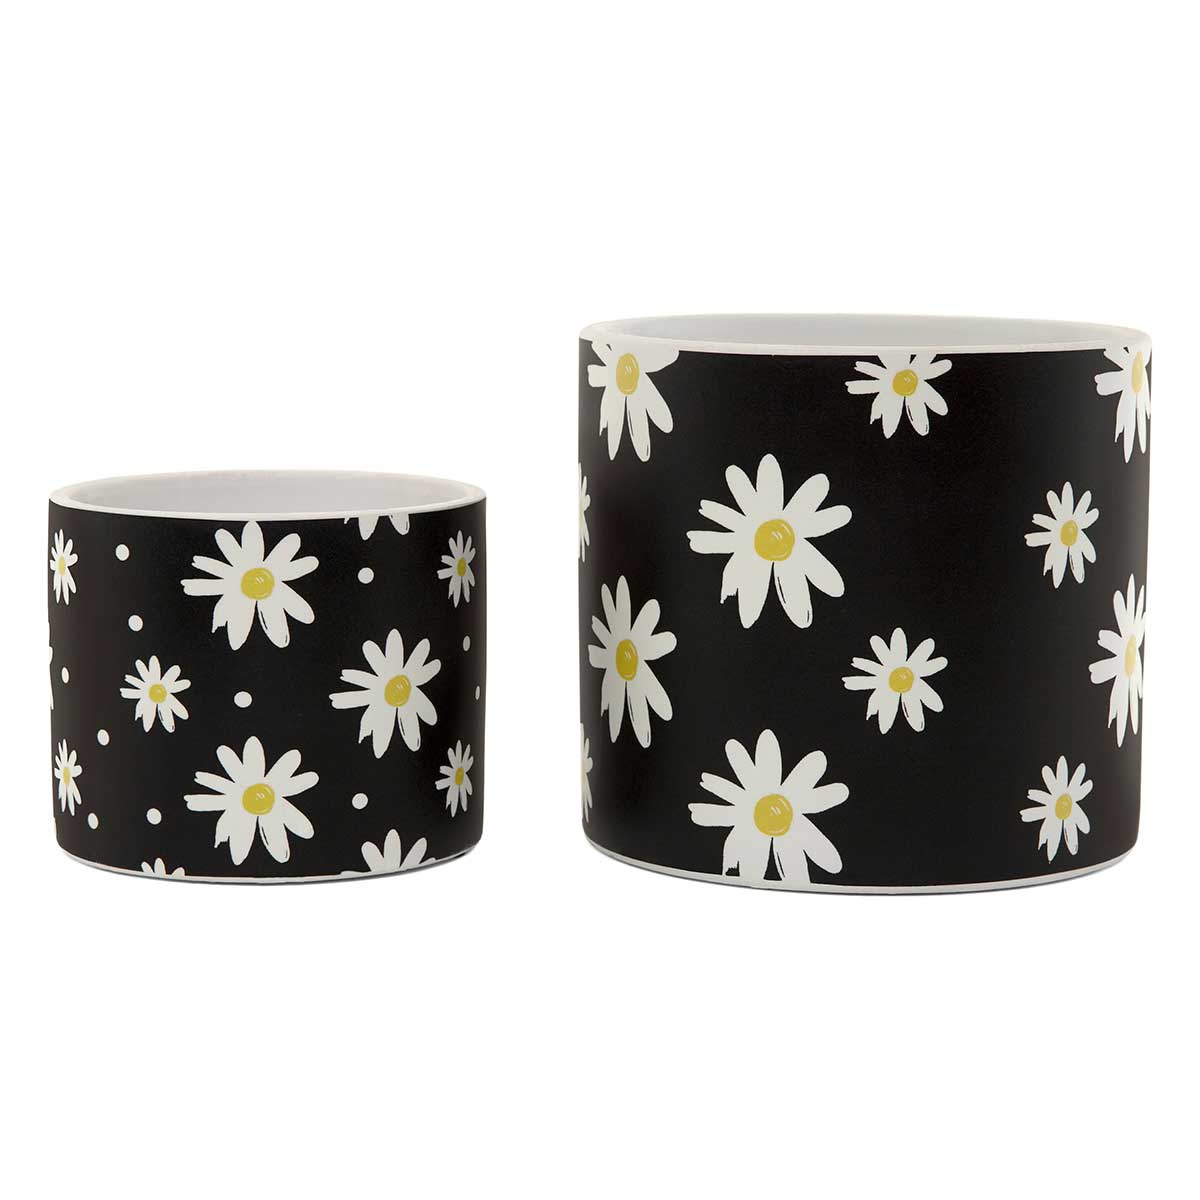 b50 POT MAISY DAISY LARGE 5.25IN X 4.75IN BLACK/WHITE CERAMIC - Click Image to Close